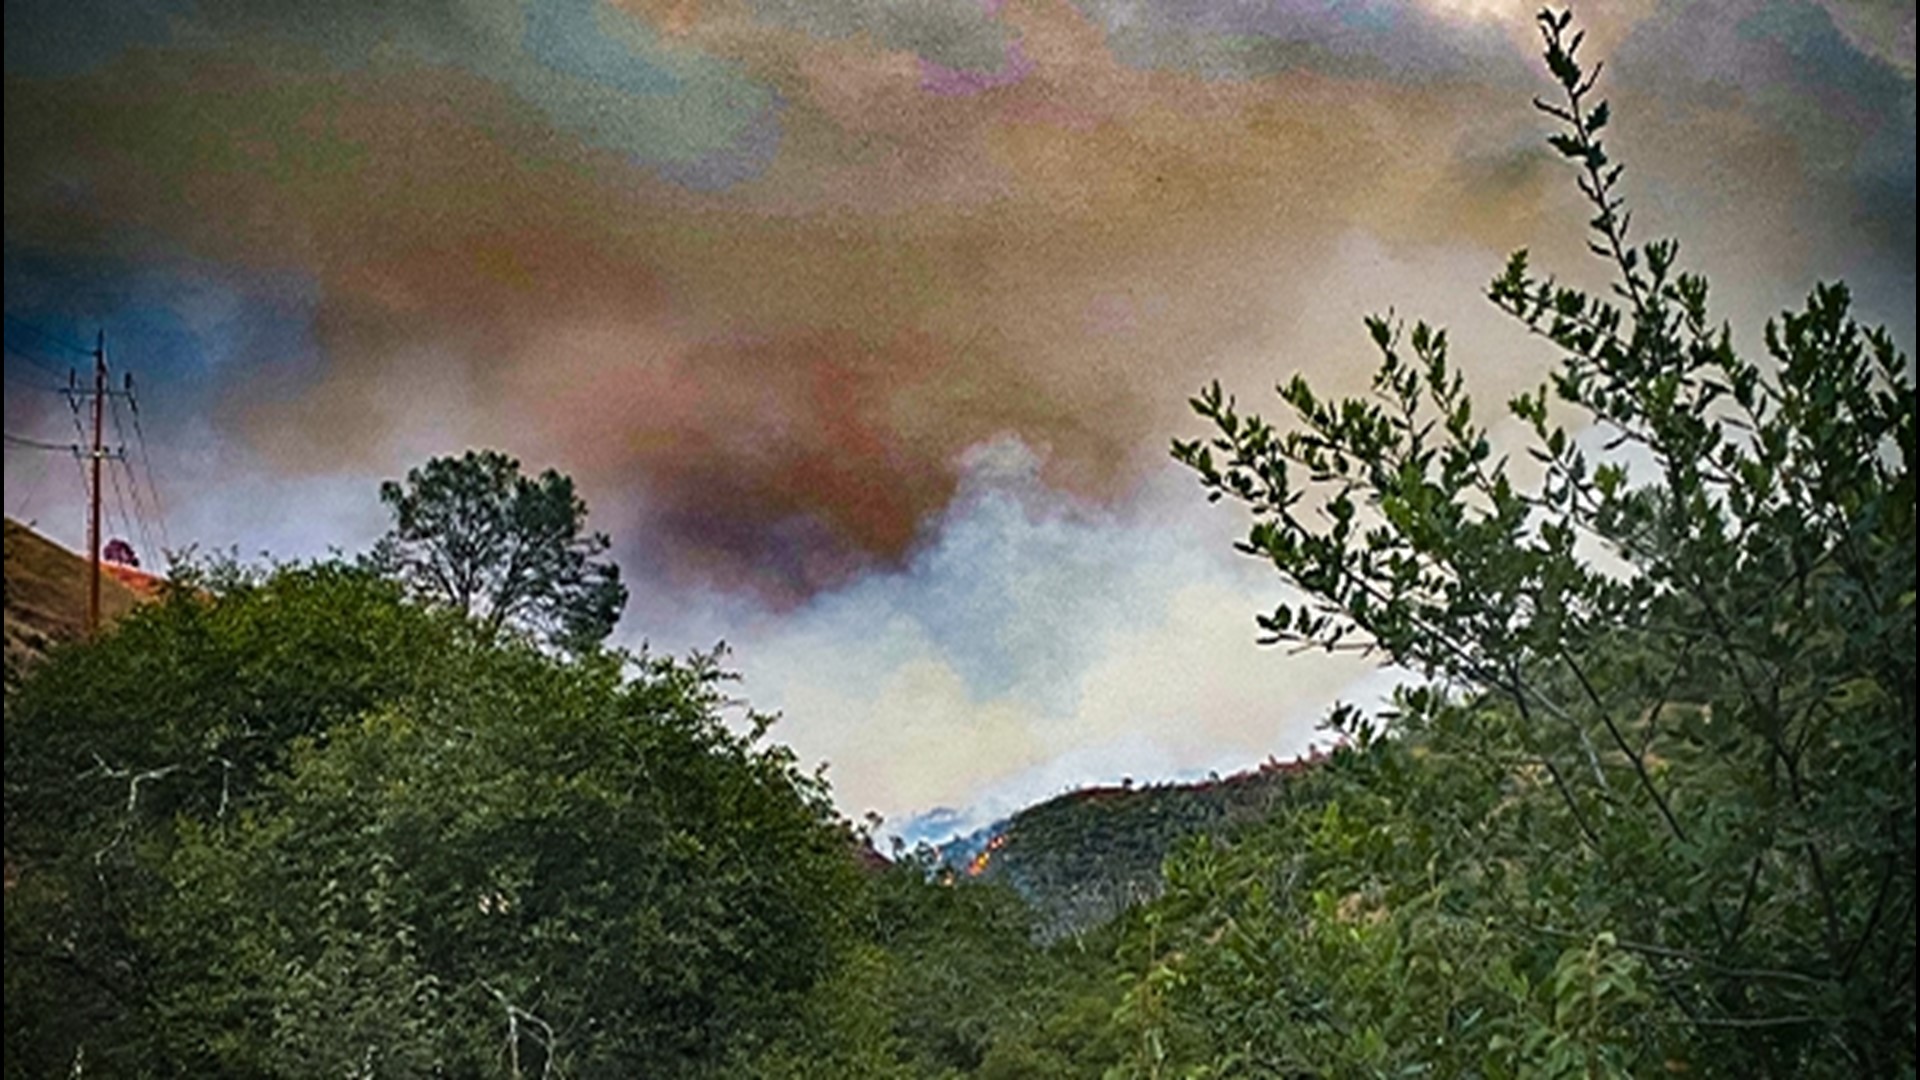 The Amador County Sheriff's Office said Cal Fire issued an evacuation order for all people in two-mile radius centered around Lake Tabeau.